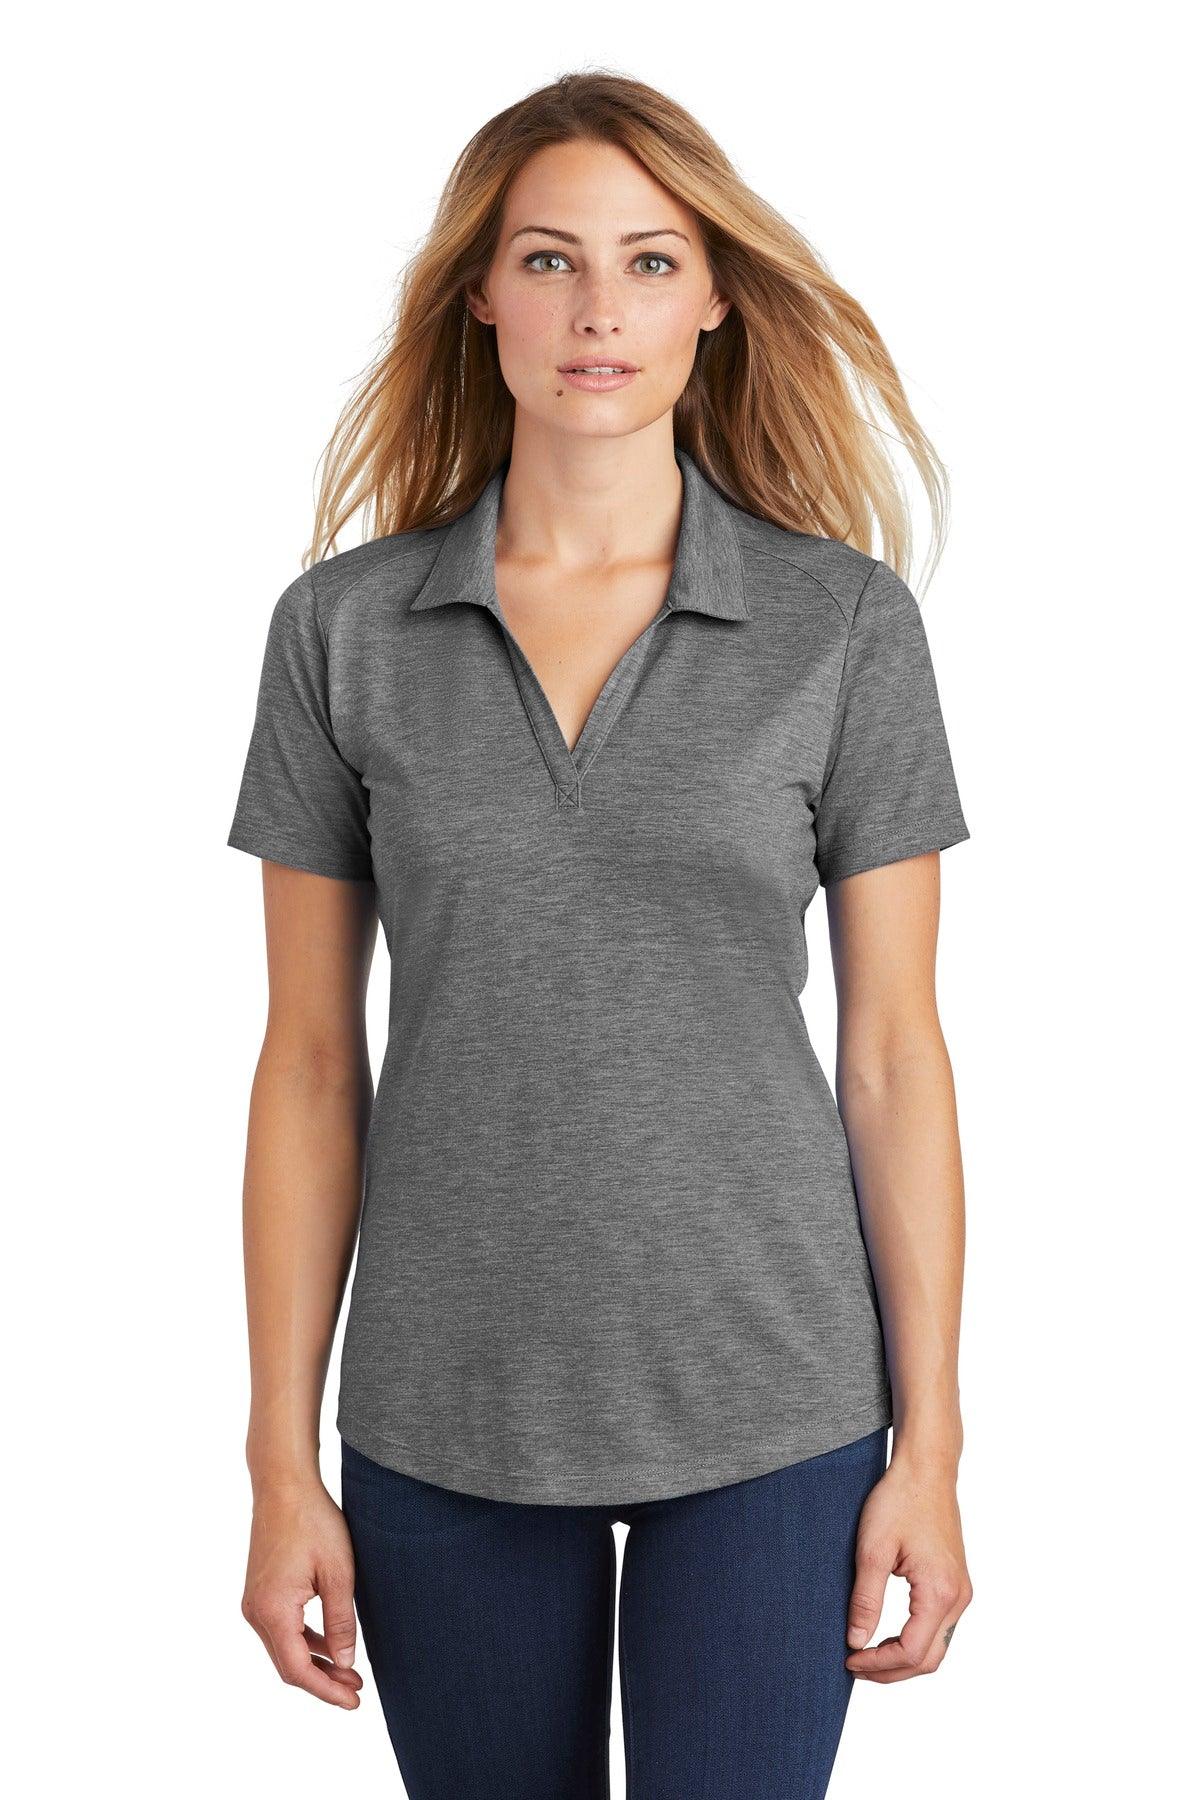 Sport-Tek Ladies PosiCharge Tri-Blend Wicking Polo. LST405 - Dresses Max